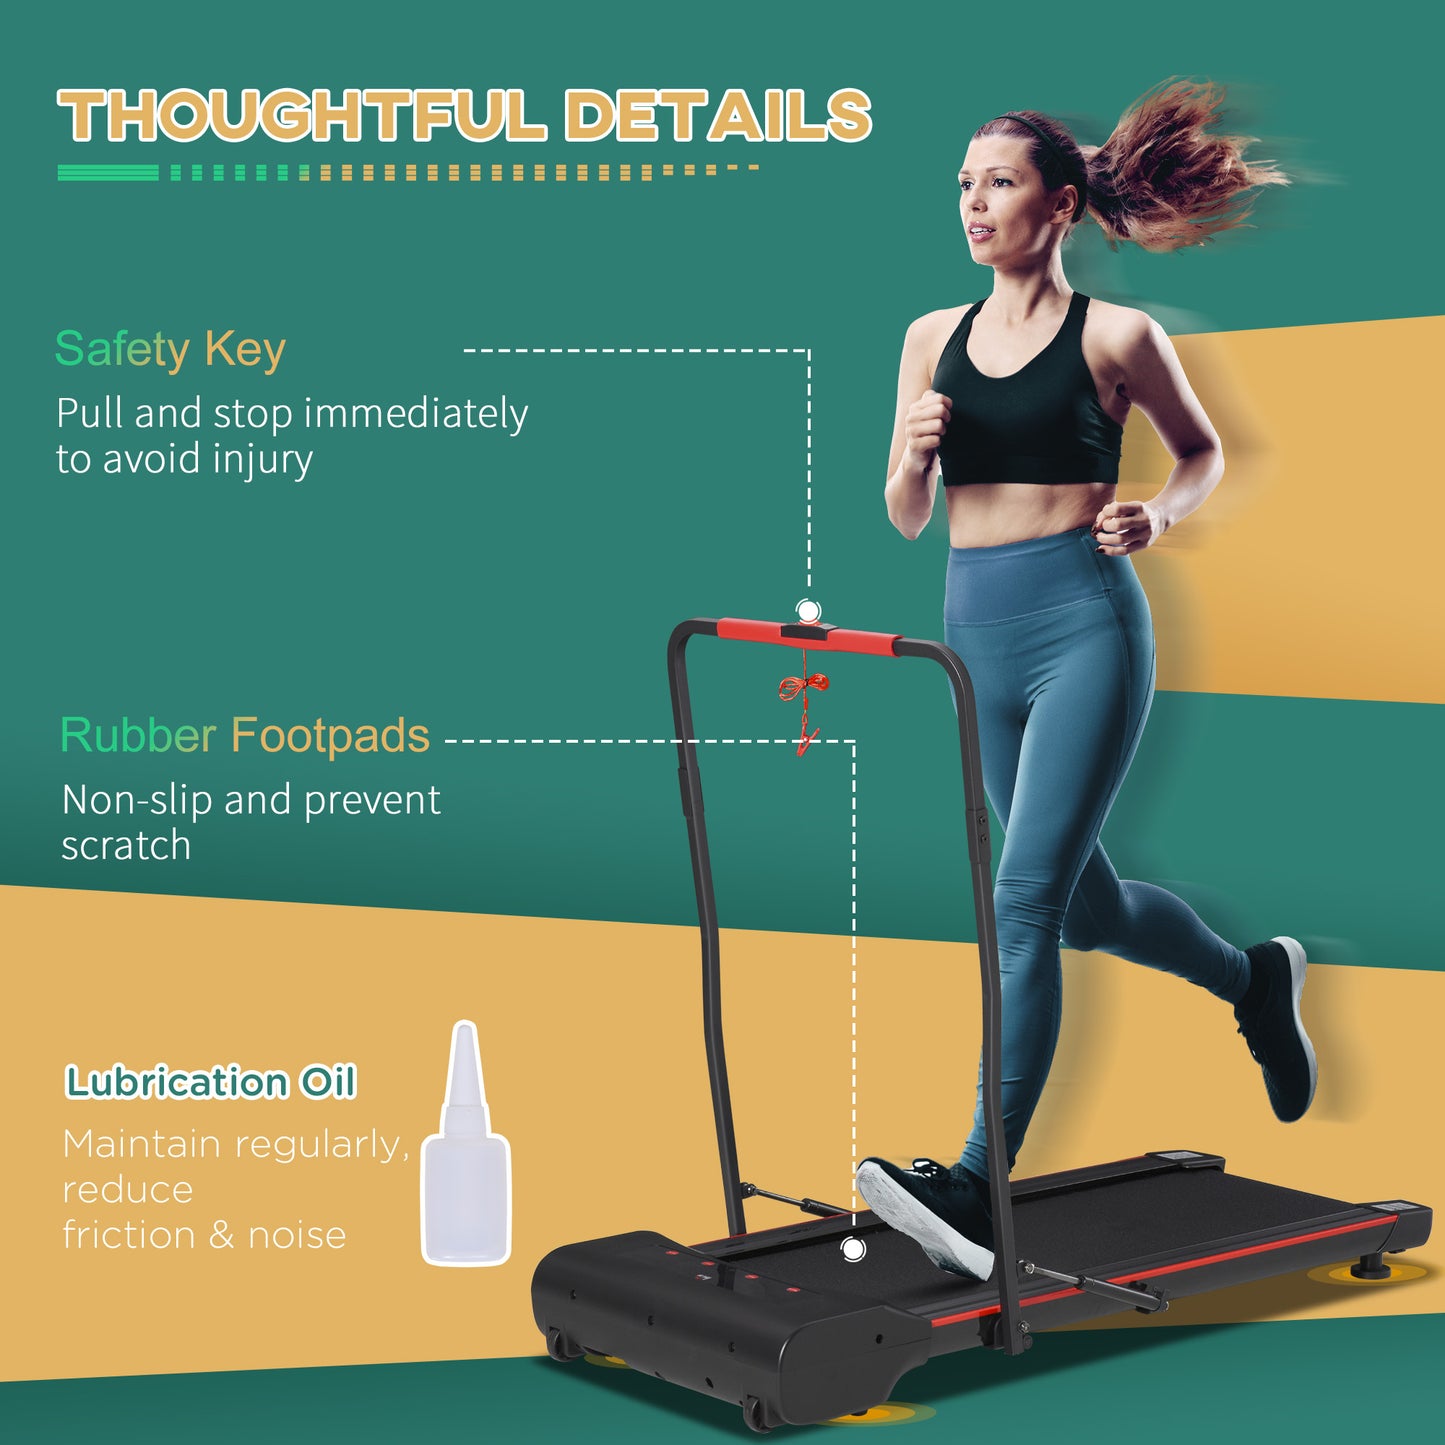 HOMCOM Foldable Walking Machine Treadmill 1-6km/h with LED Display & Remote Control Exercise Fitness for Home Office